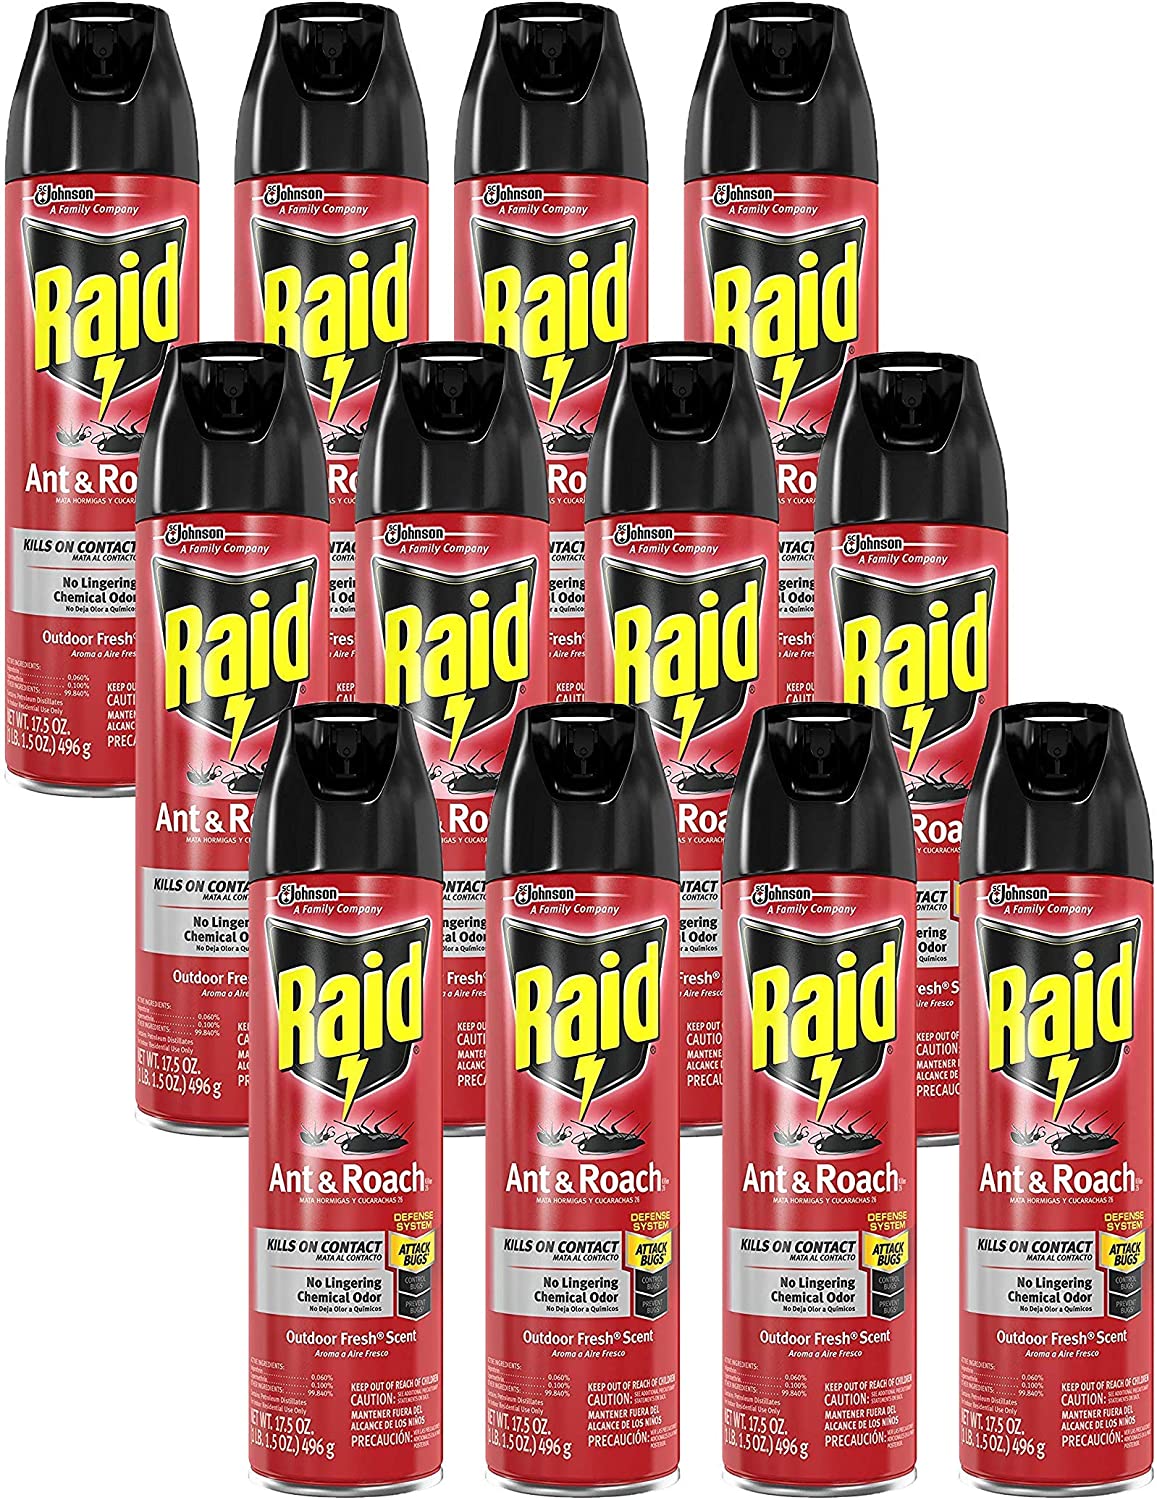 Raid Ant & Roach Killer Defense System, Outdoor Fresh Scent 17.5 Ounce (Pack of 12)